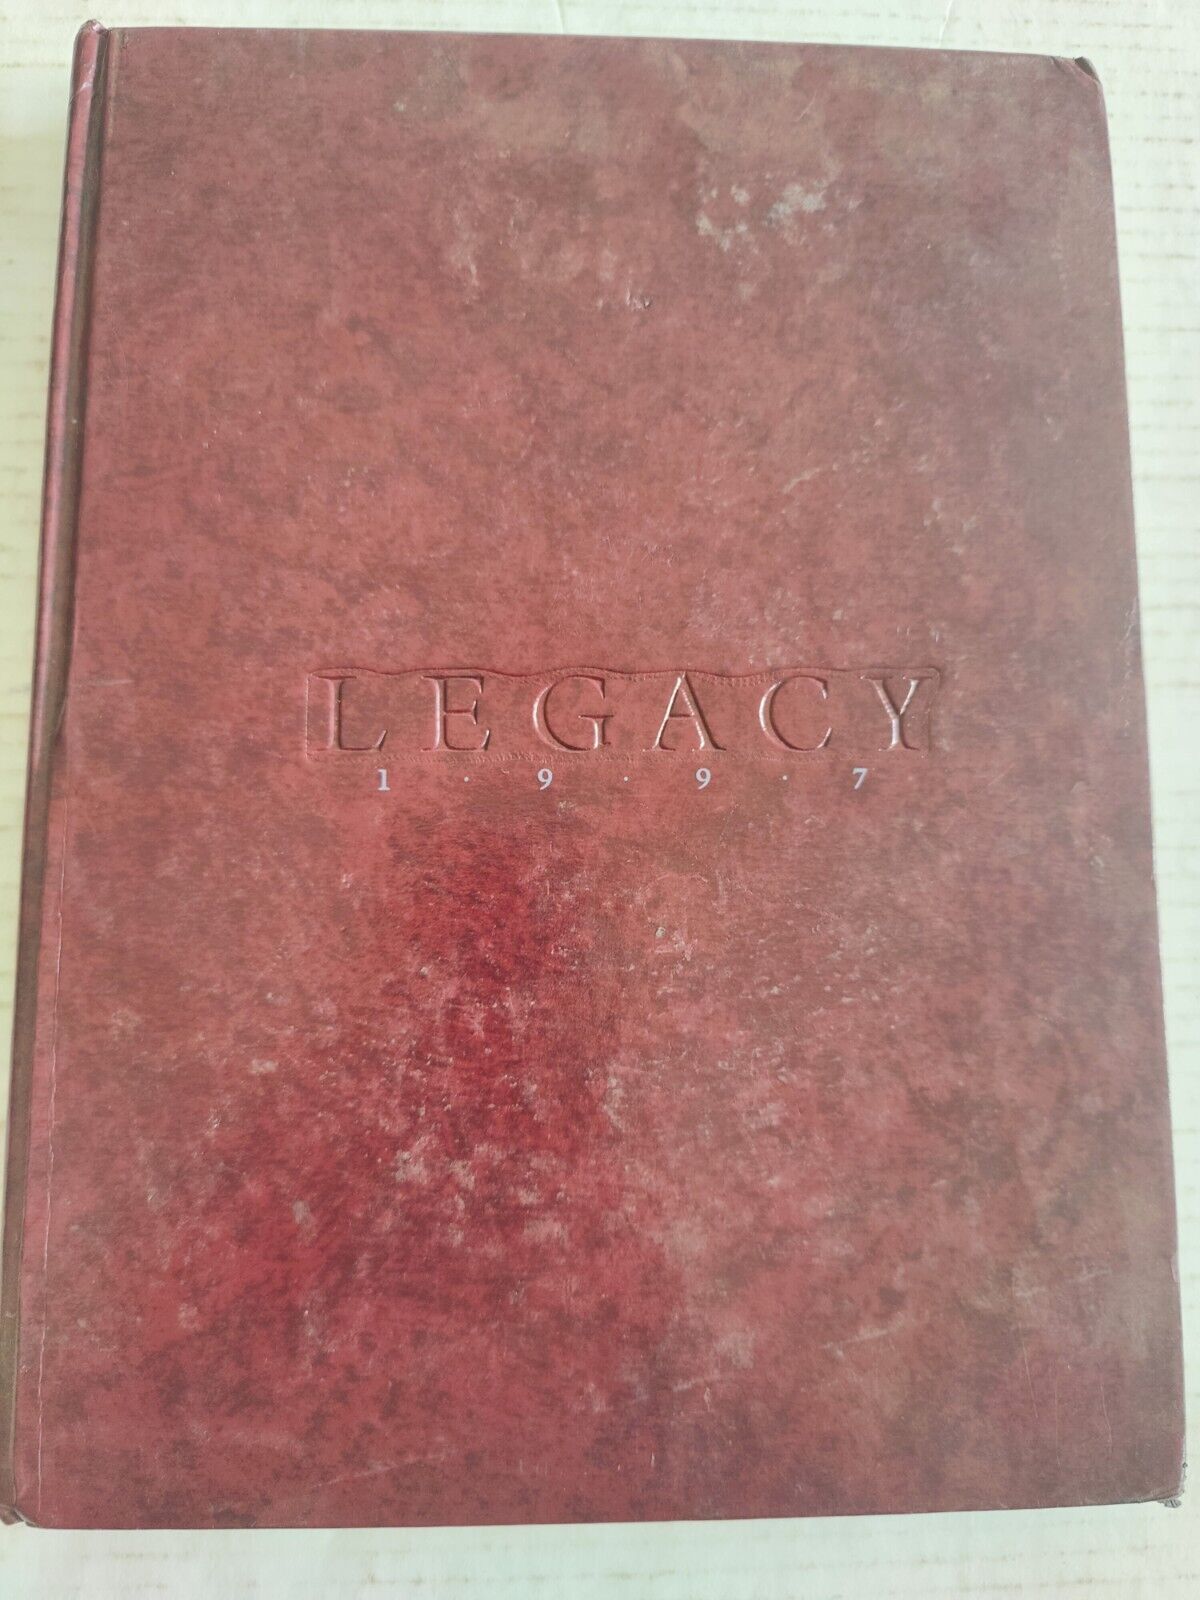 1997 Loyola University Chicago Hard Cover Yearbook Vintage